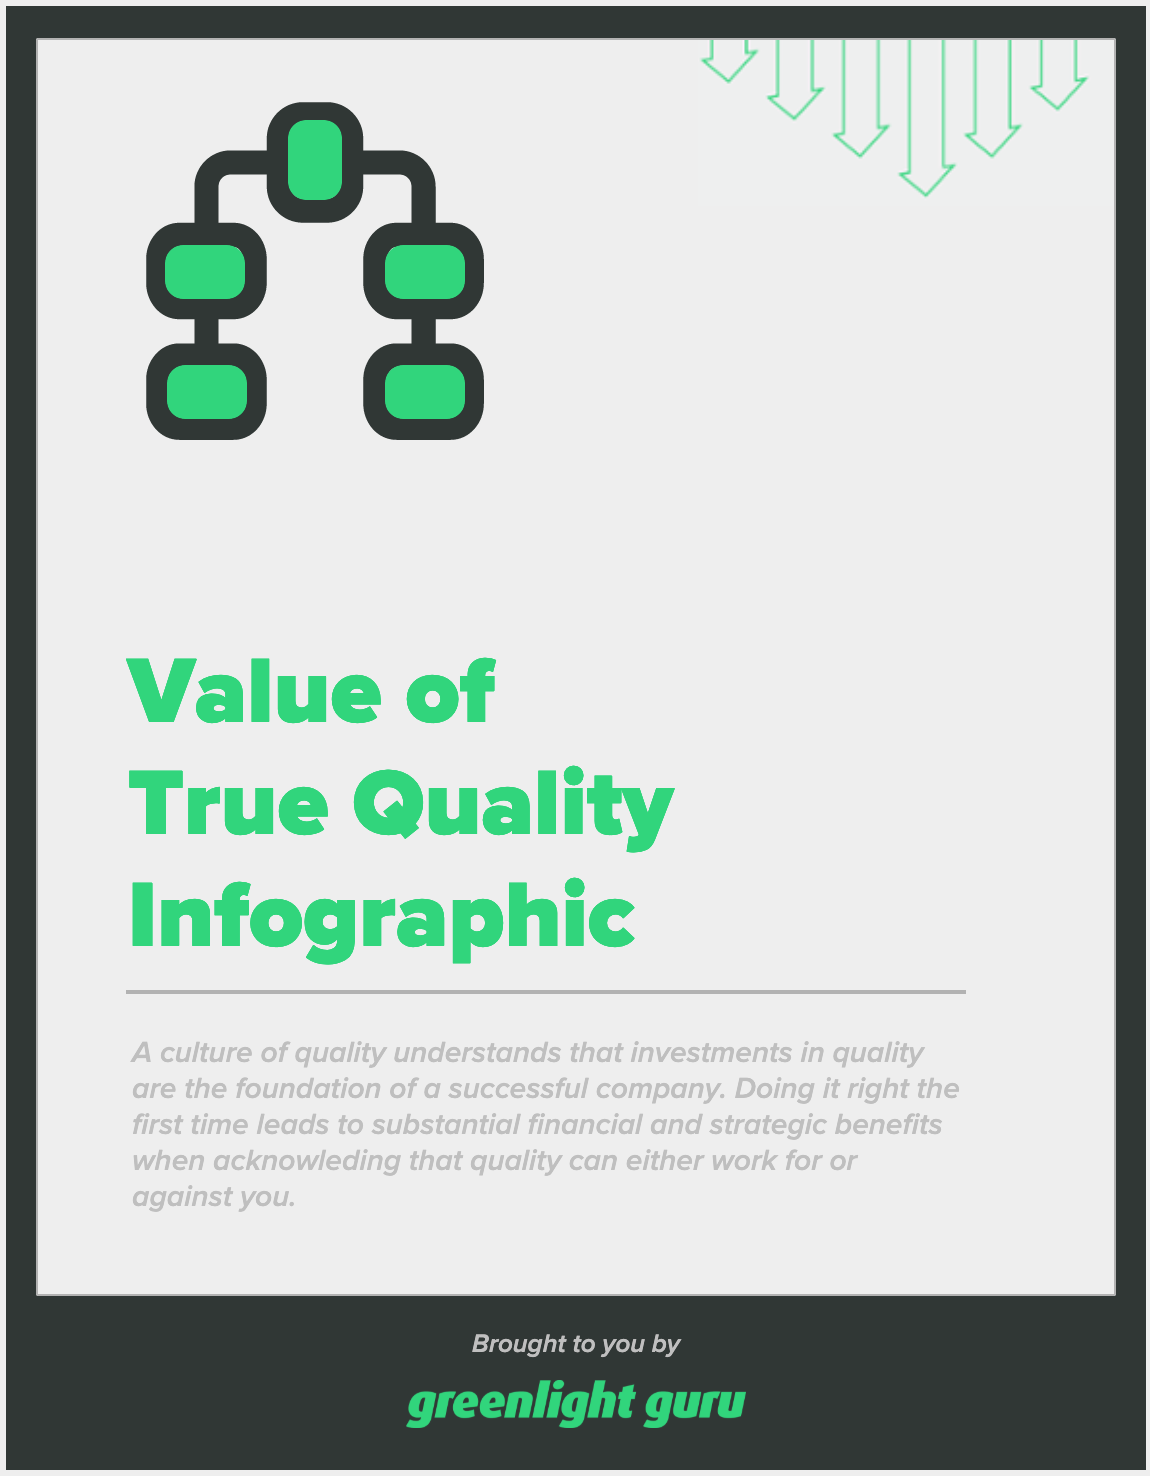 Value of True Quality Infographic - slide-in cover